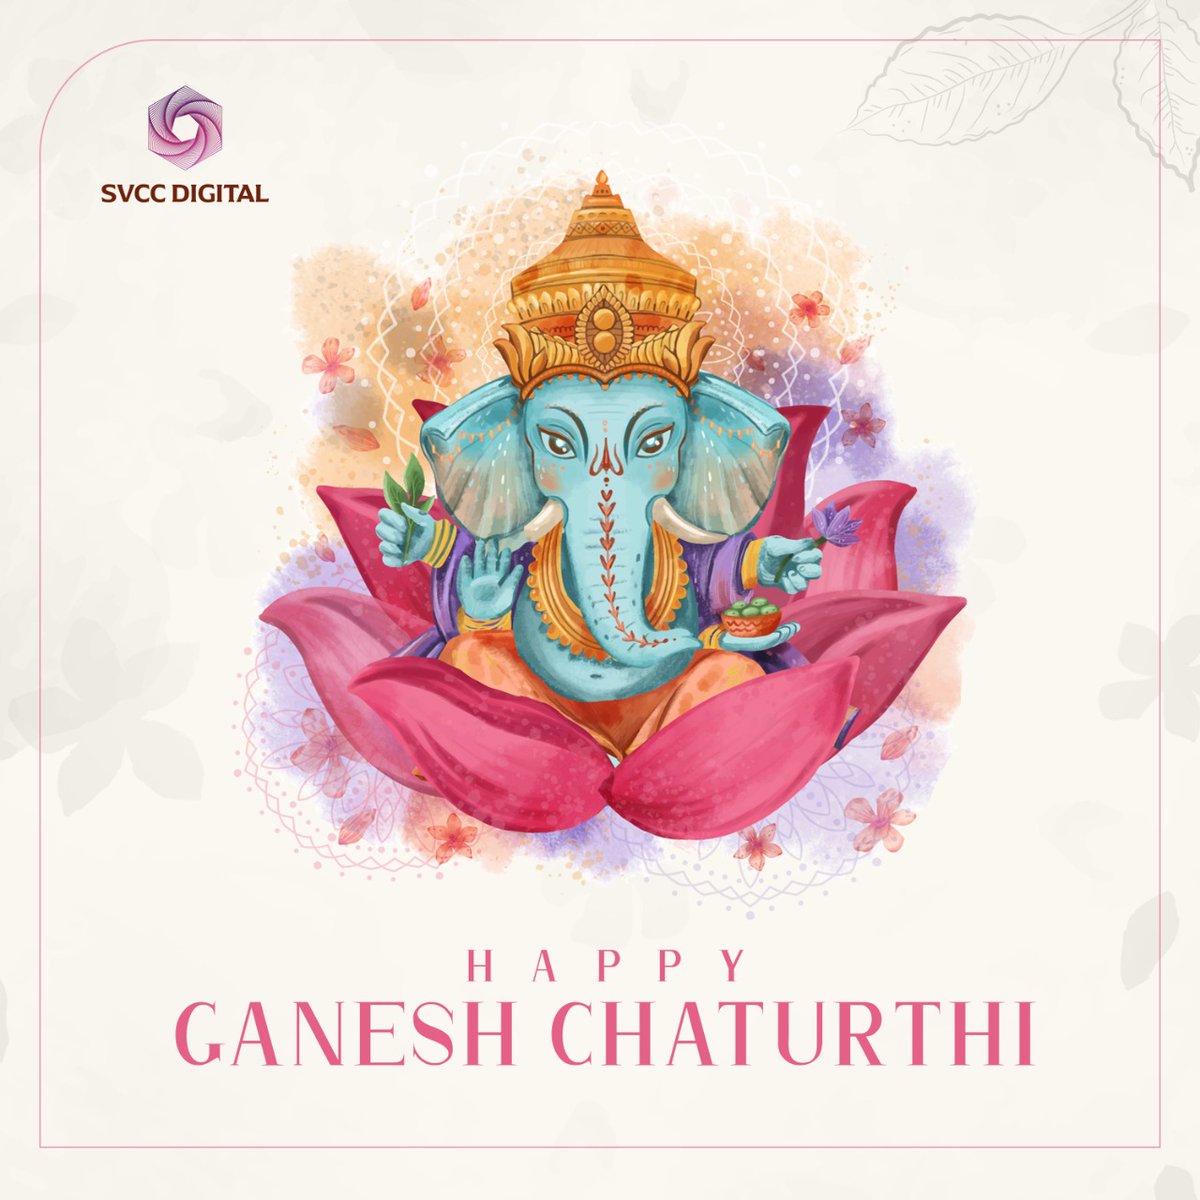 Wishing you and your family a #HappyGaneshChaturthi 🤗 May this festival bring a new beginning and light into your lives.